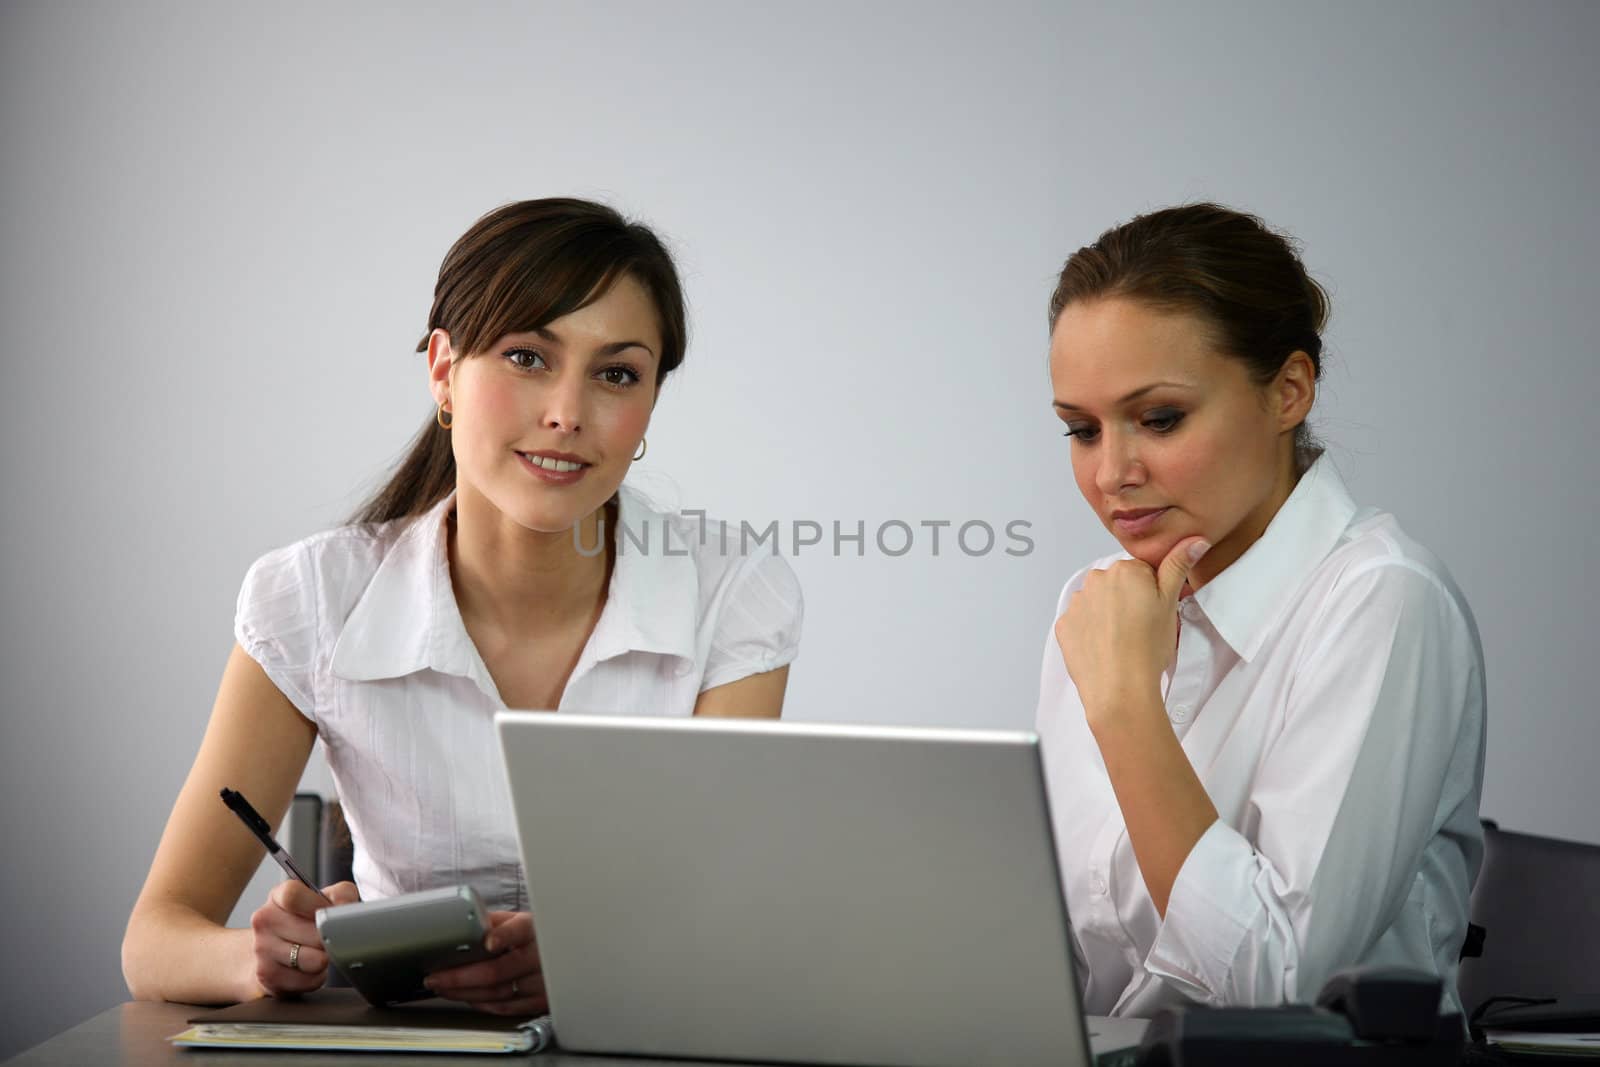 Clerical workers in front of a laptop by phovoir